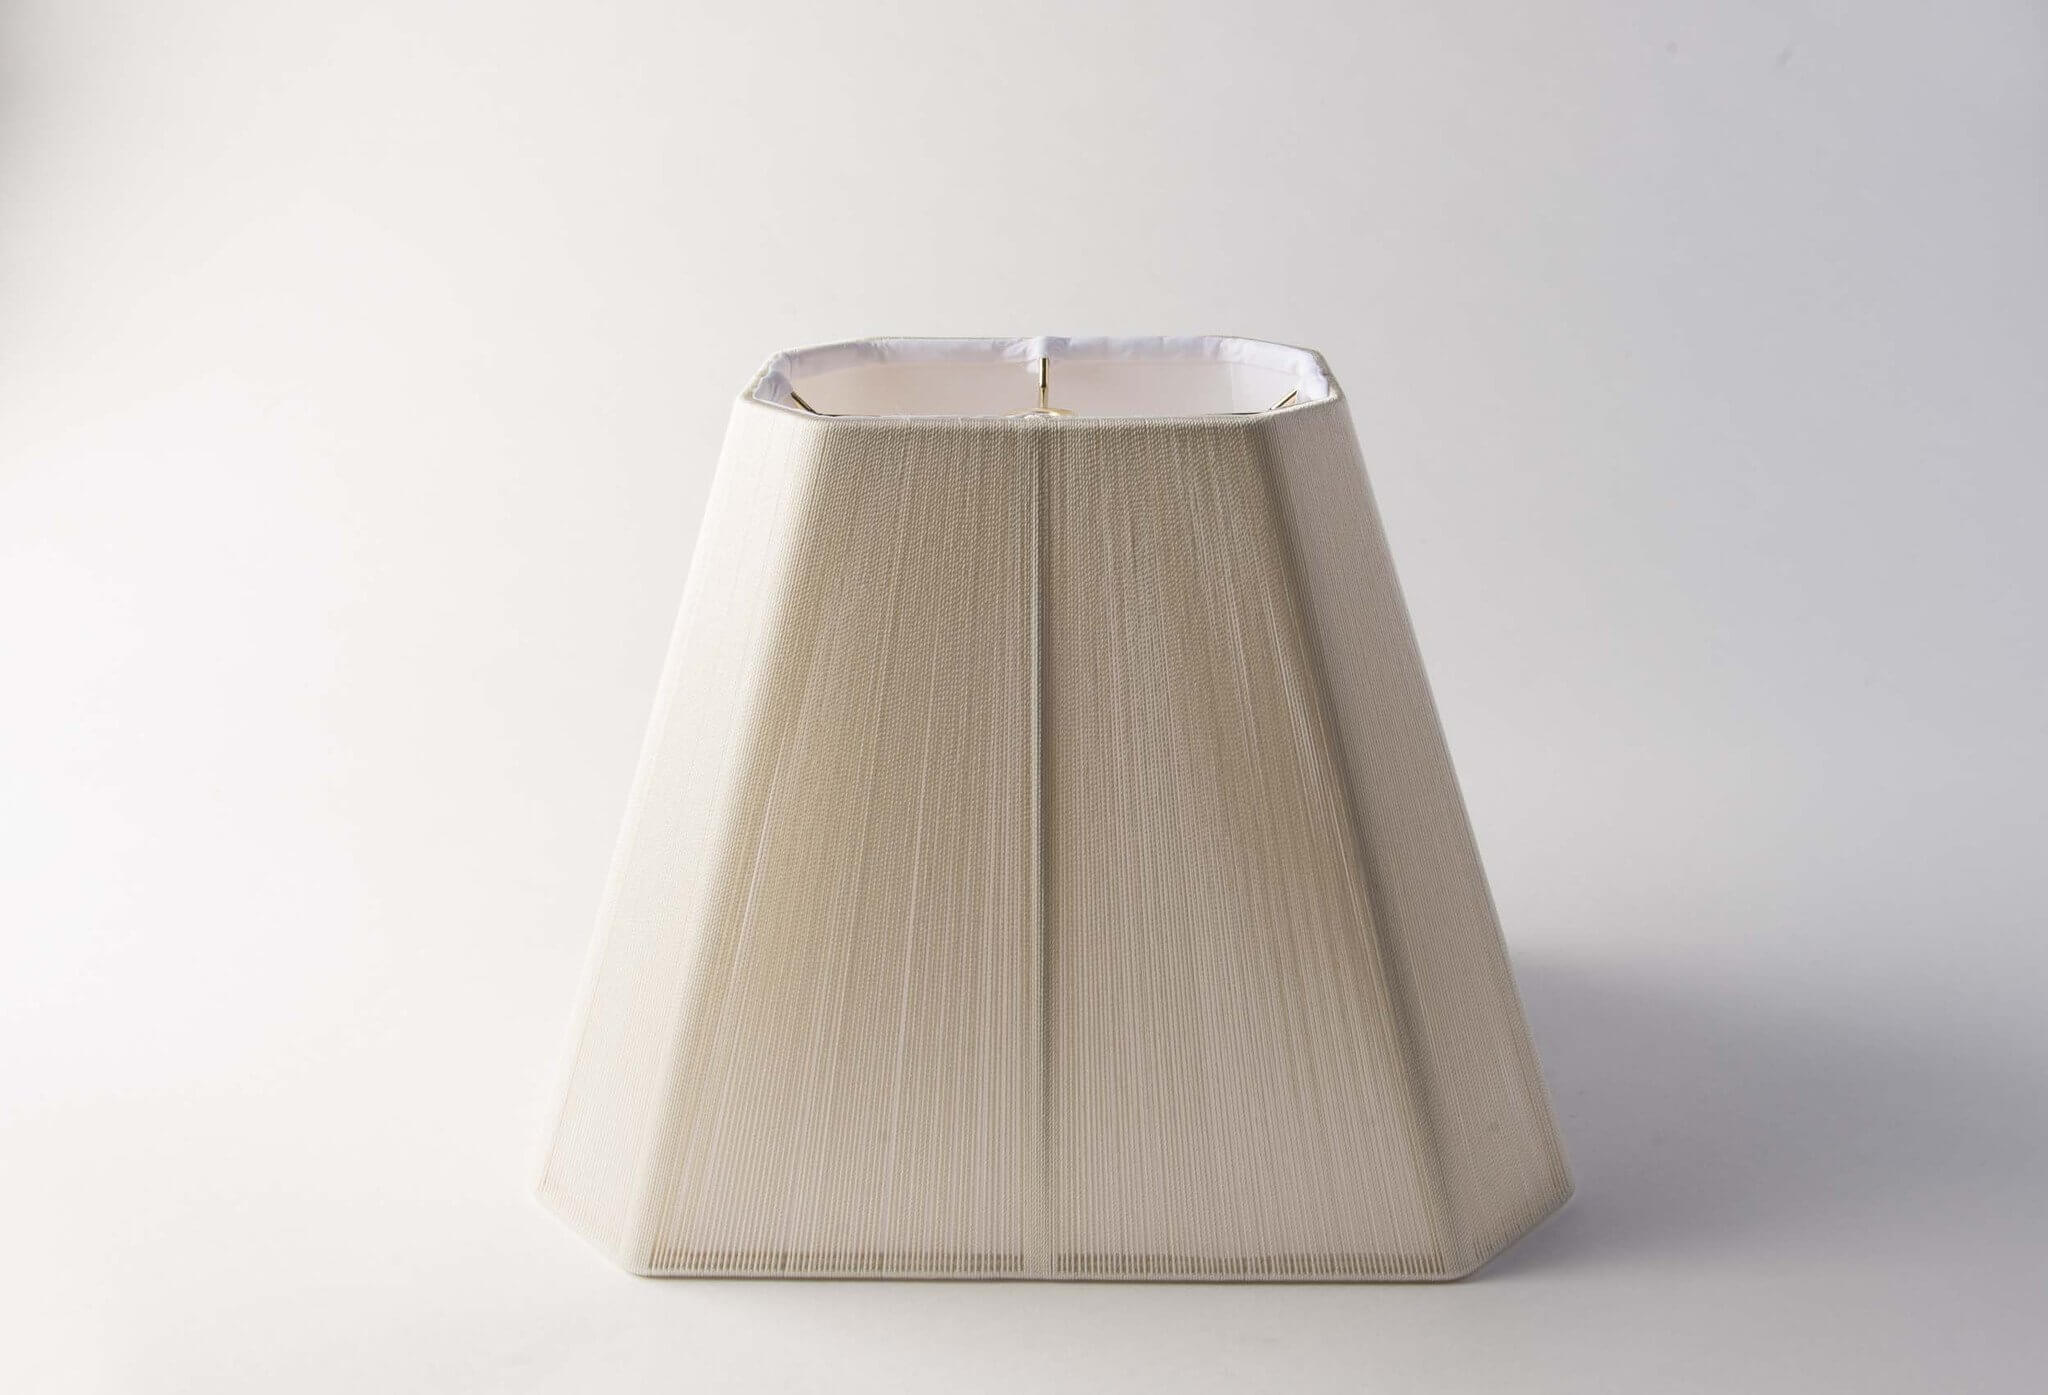 https://www.hotel-lamps.com/resources/assets/images/product_images/Square (Cut Corner) Off-White Silk String.jpg